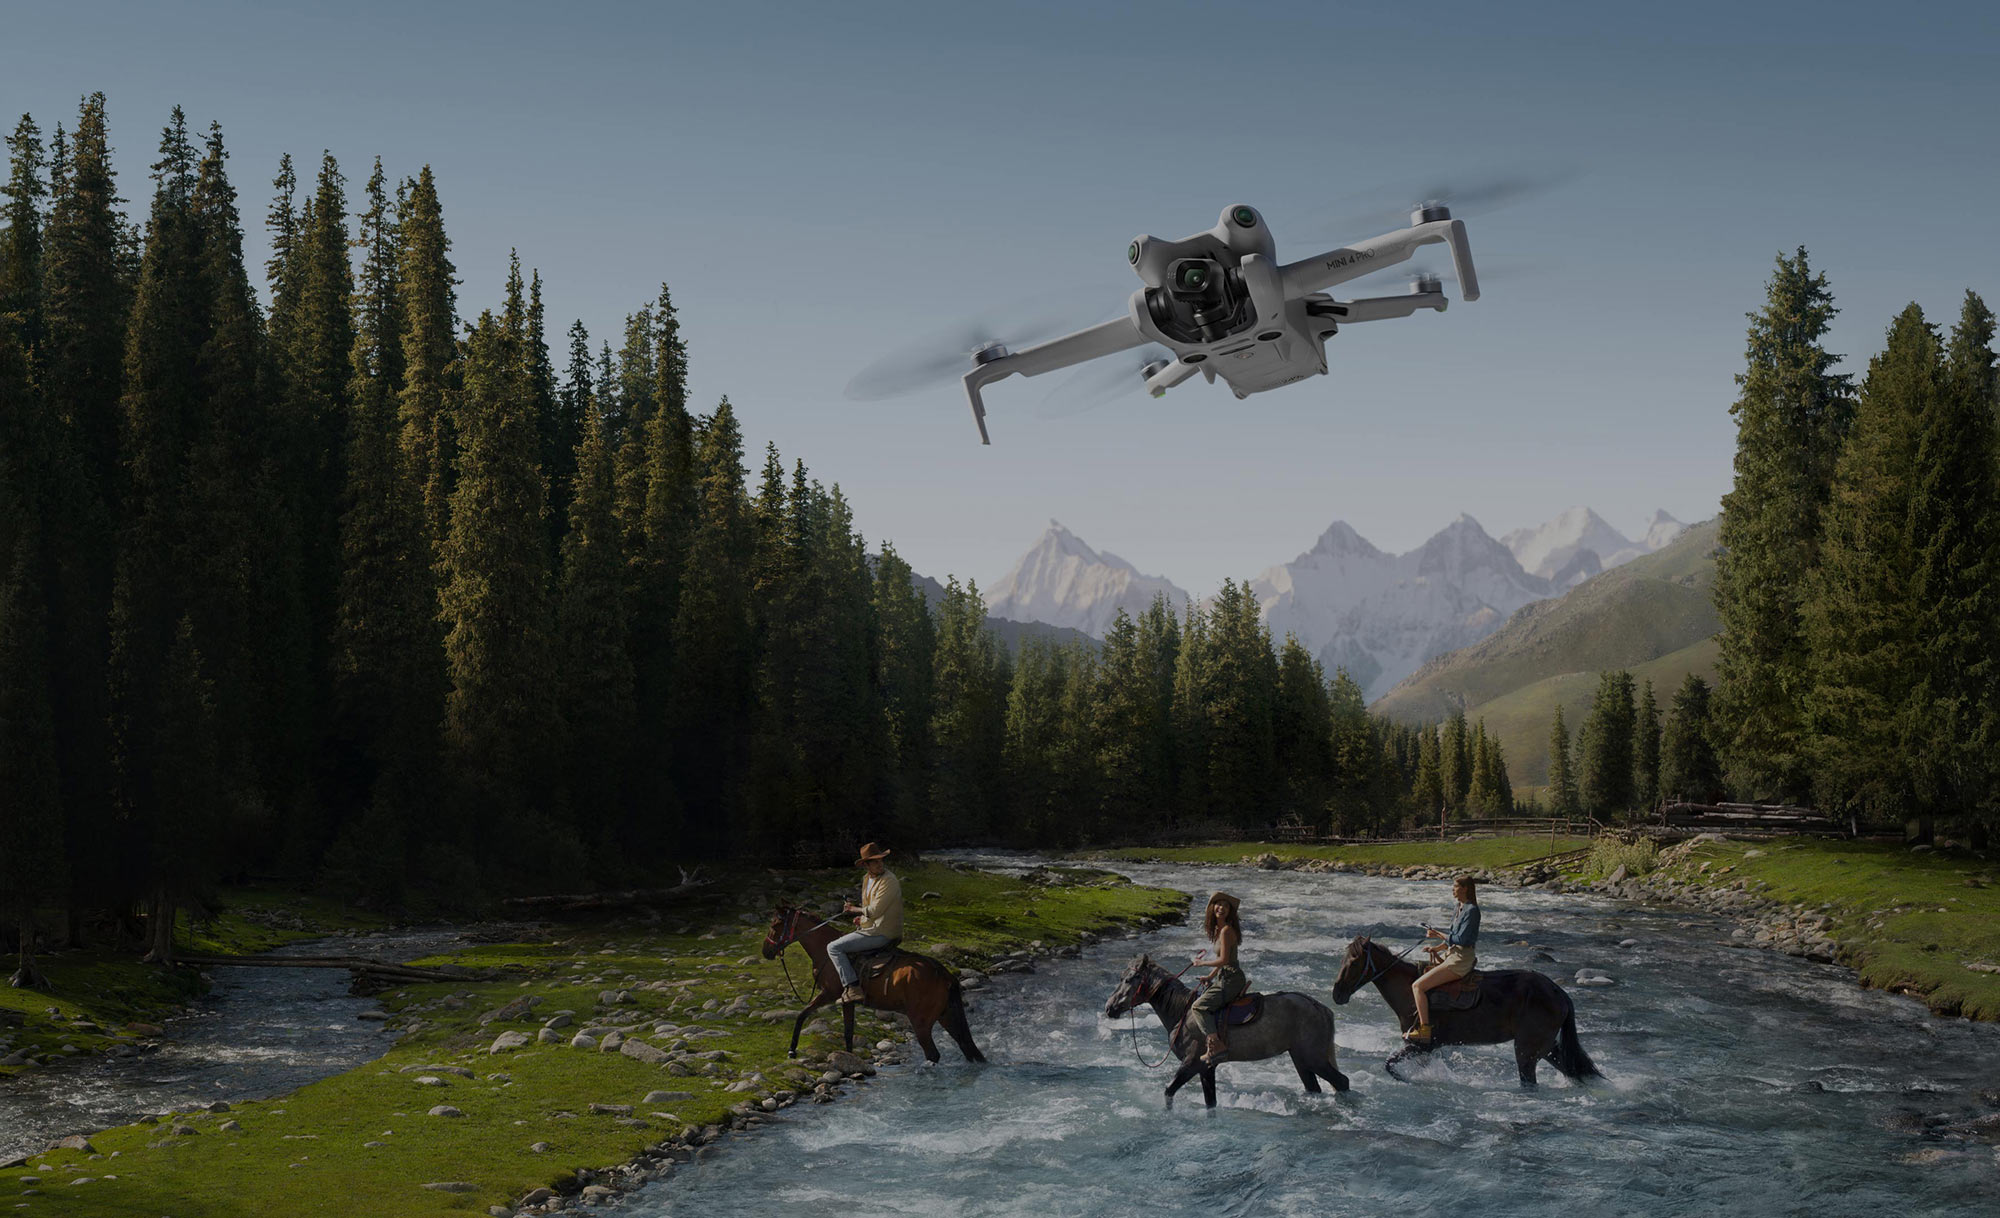 dji mini 4 pro drone flying over a river being crossed by riders on horseback.